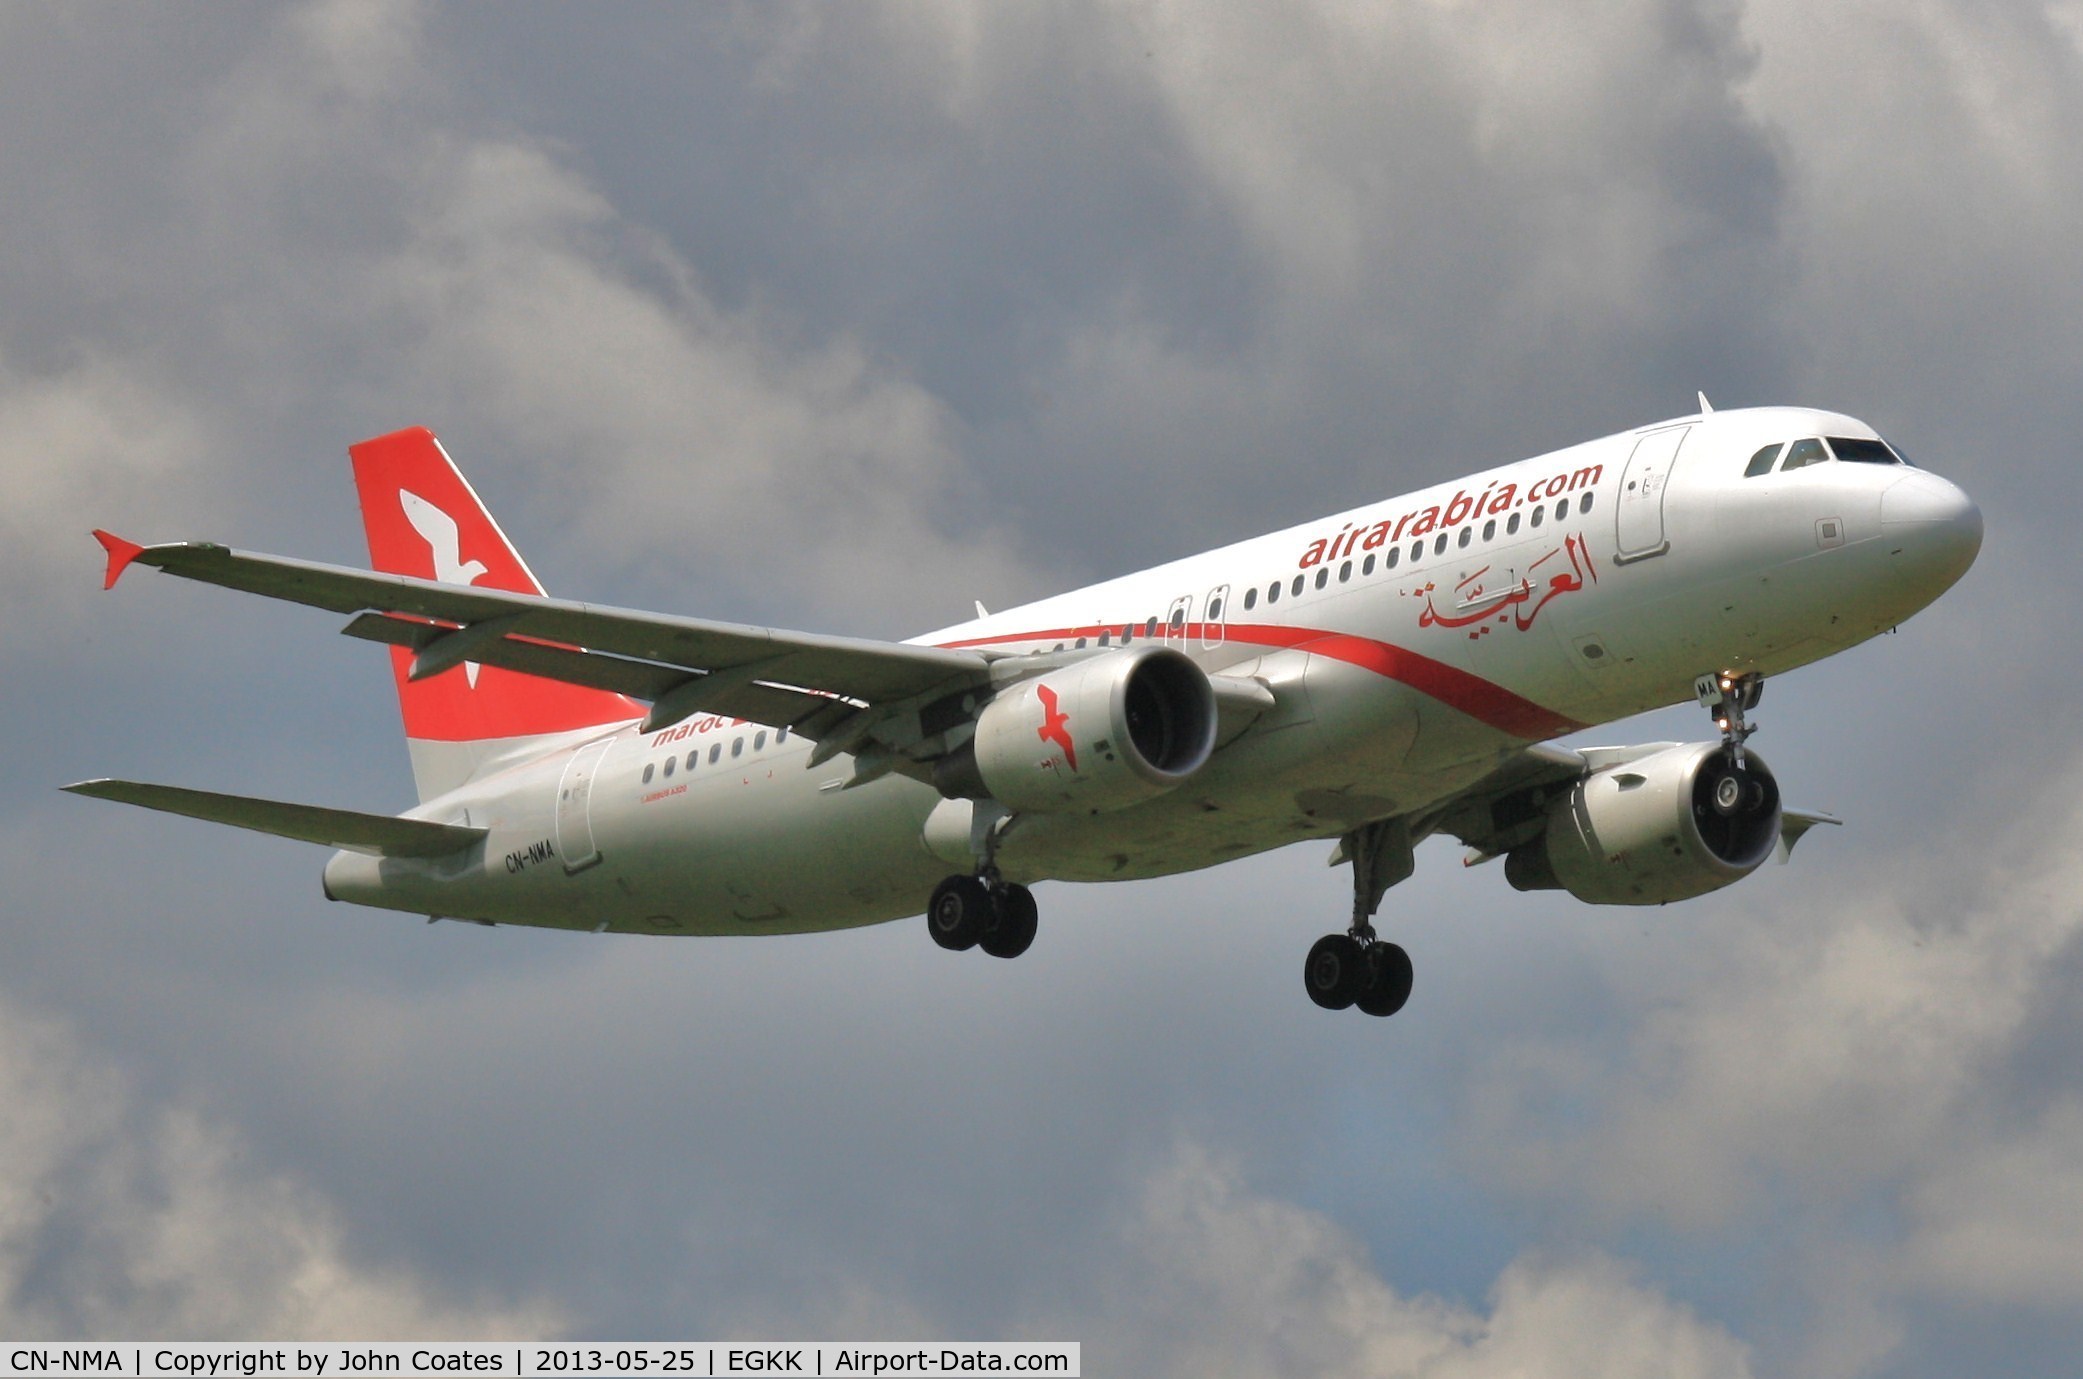 CN-NMA, 2009 Airbus A320-214 C/N 3809, On approach to 08R